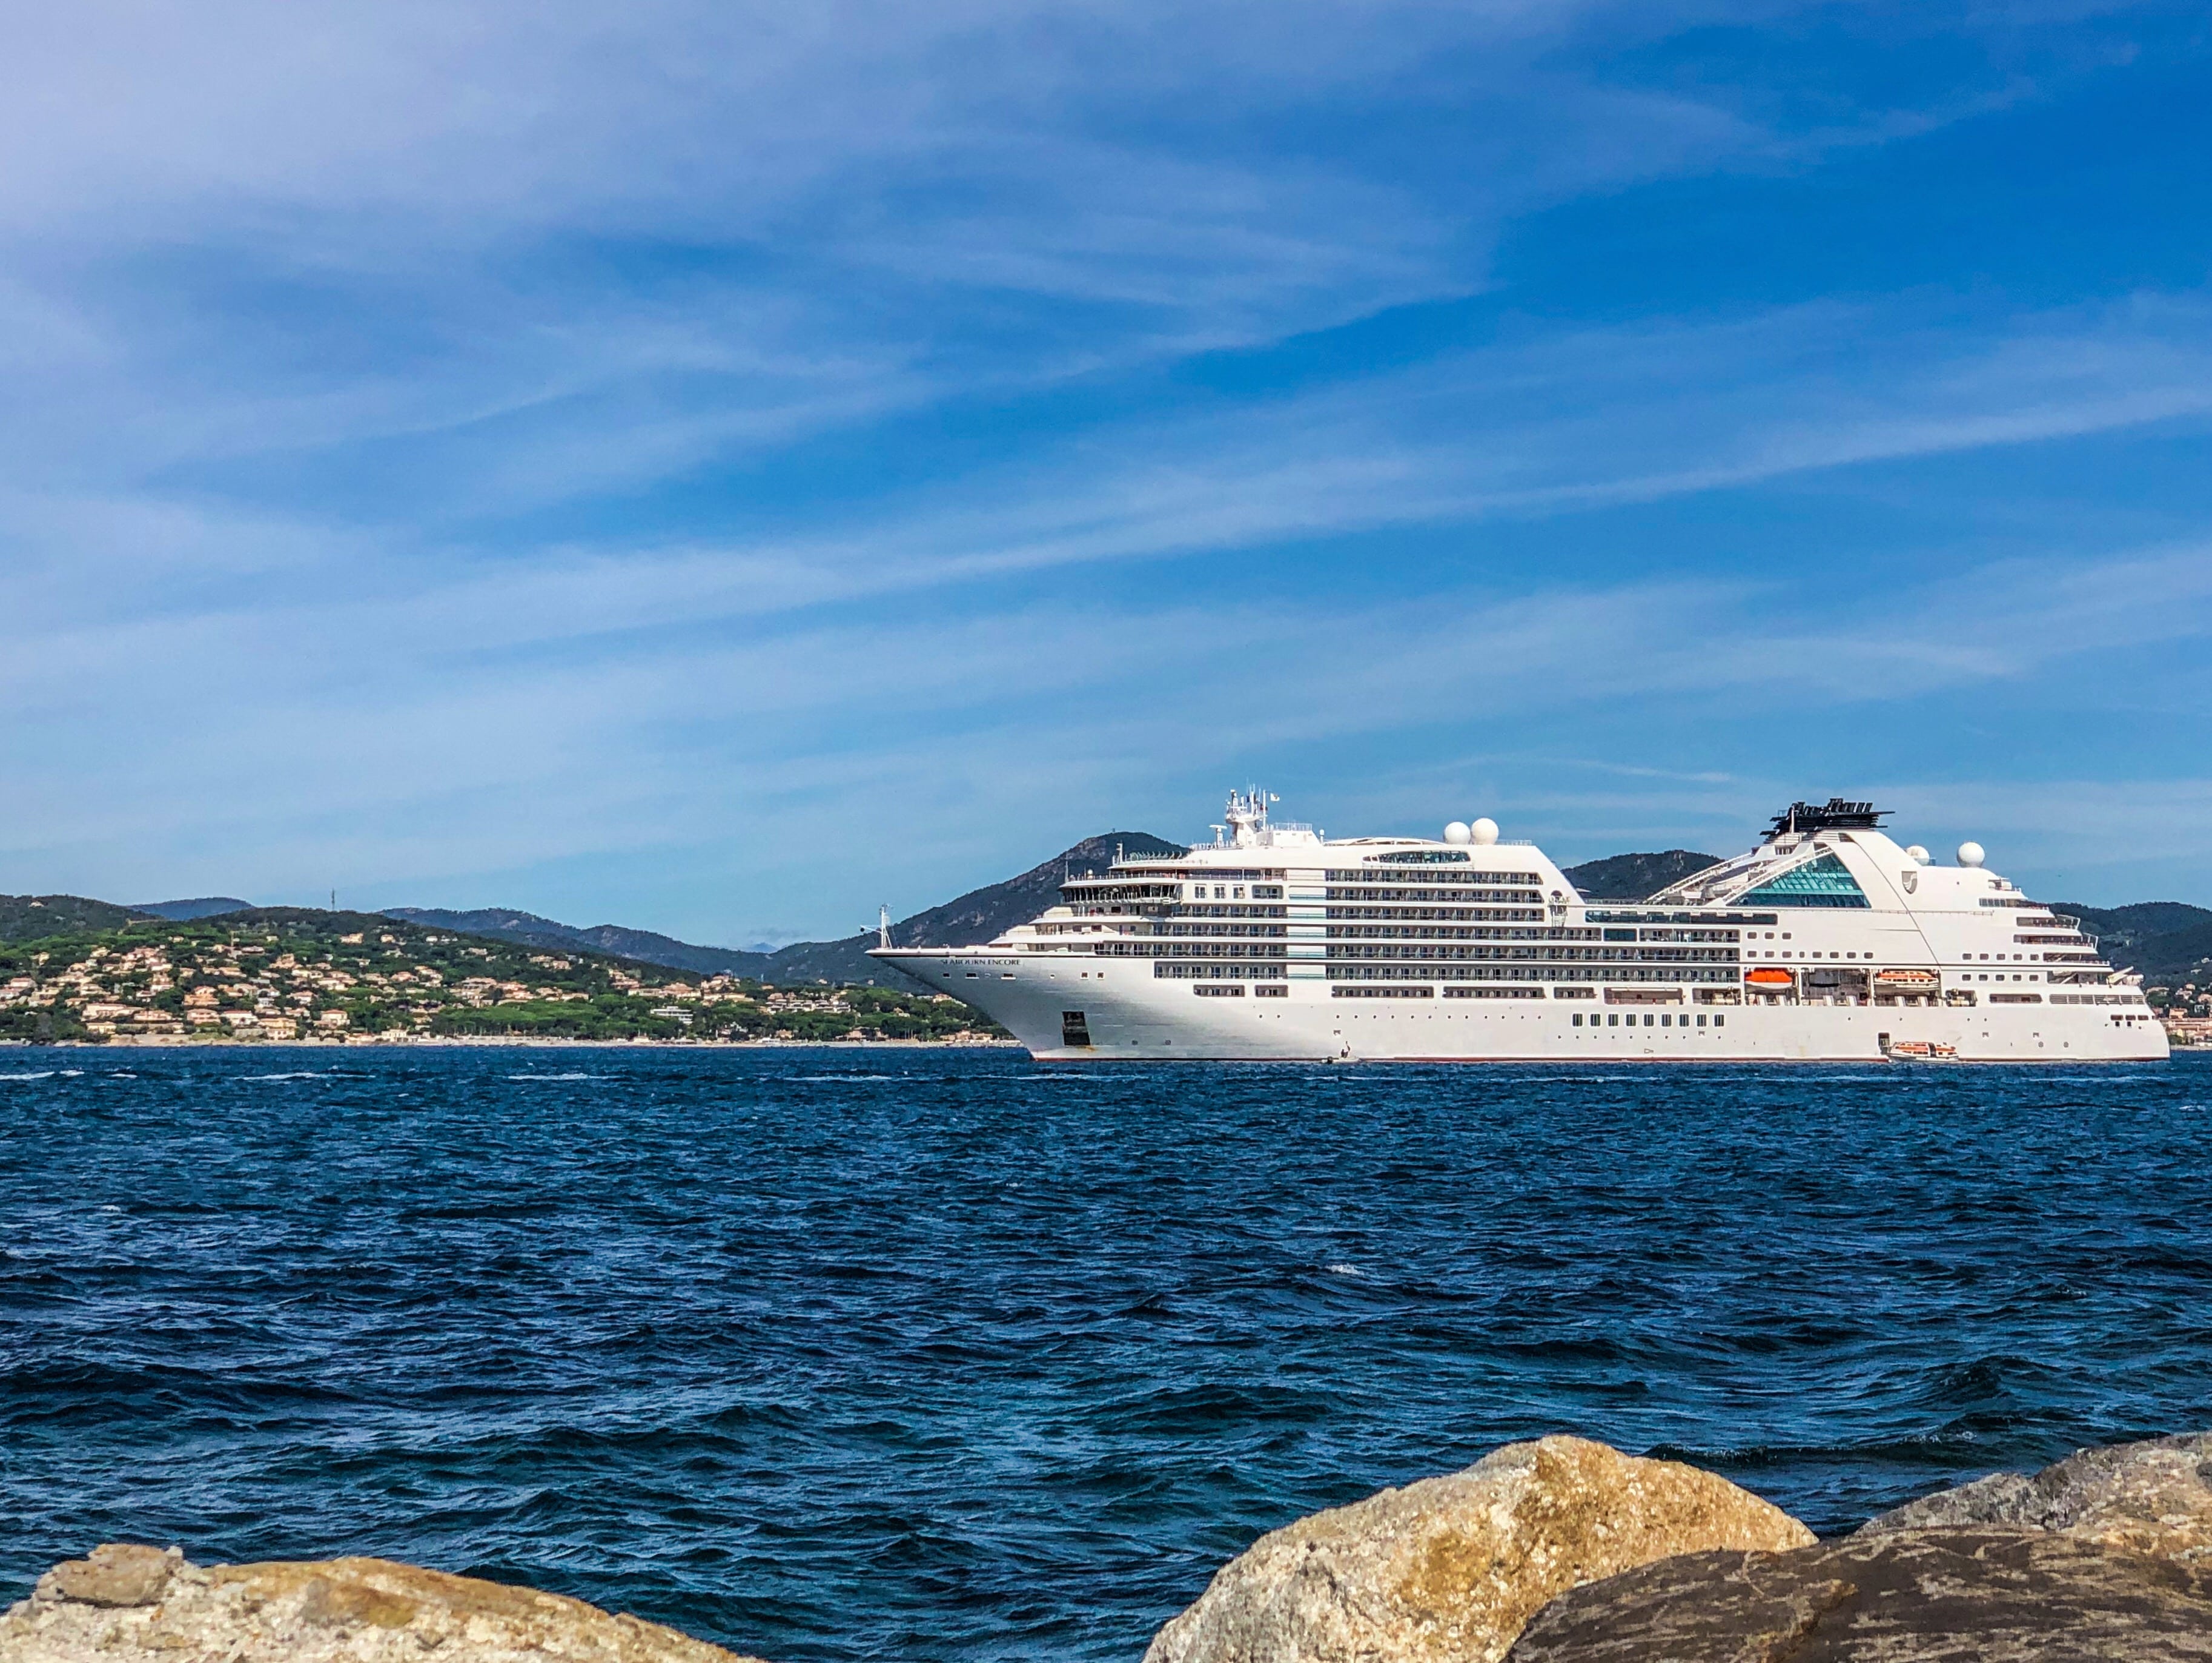 Seabourn Cruises Encore. Seabourn Cruises need-to-knows https://www.tipsfortravellers.com/seabourn-cruises-tips-things-you-need-to-know-before-cruising/